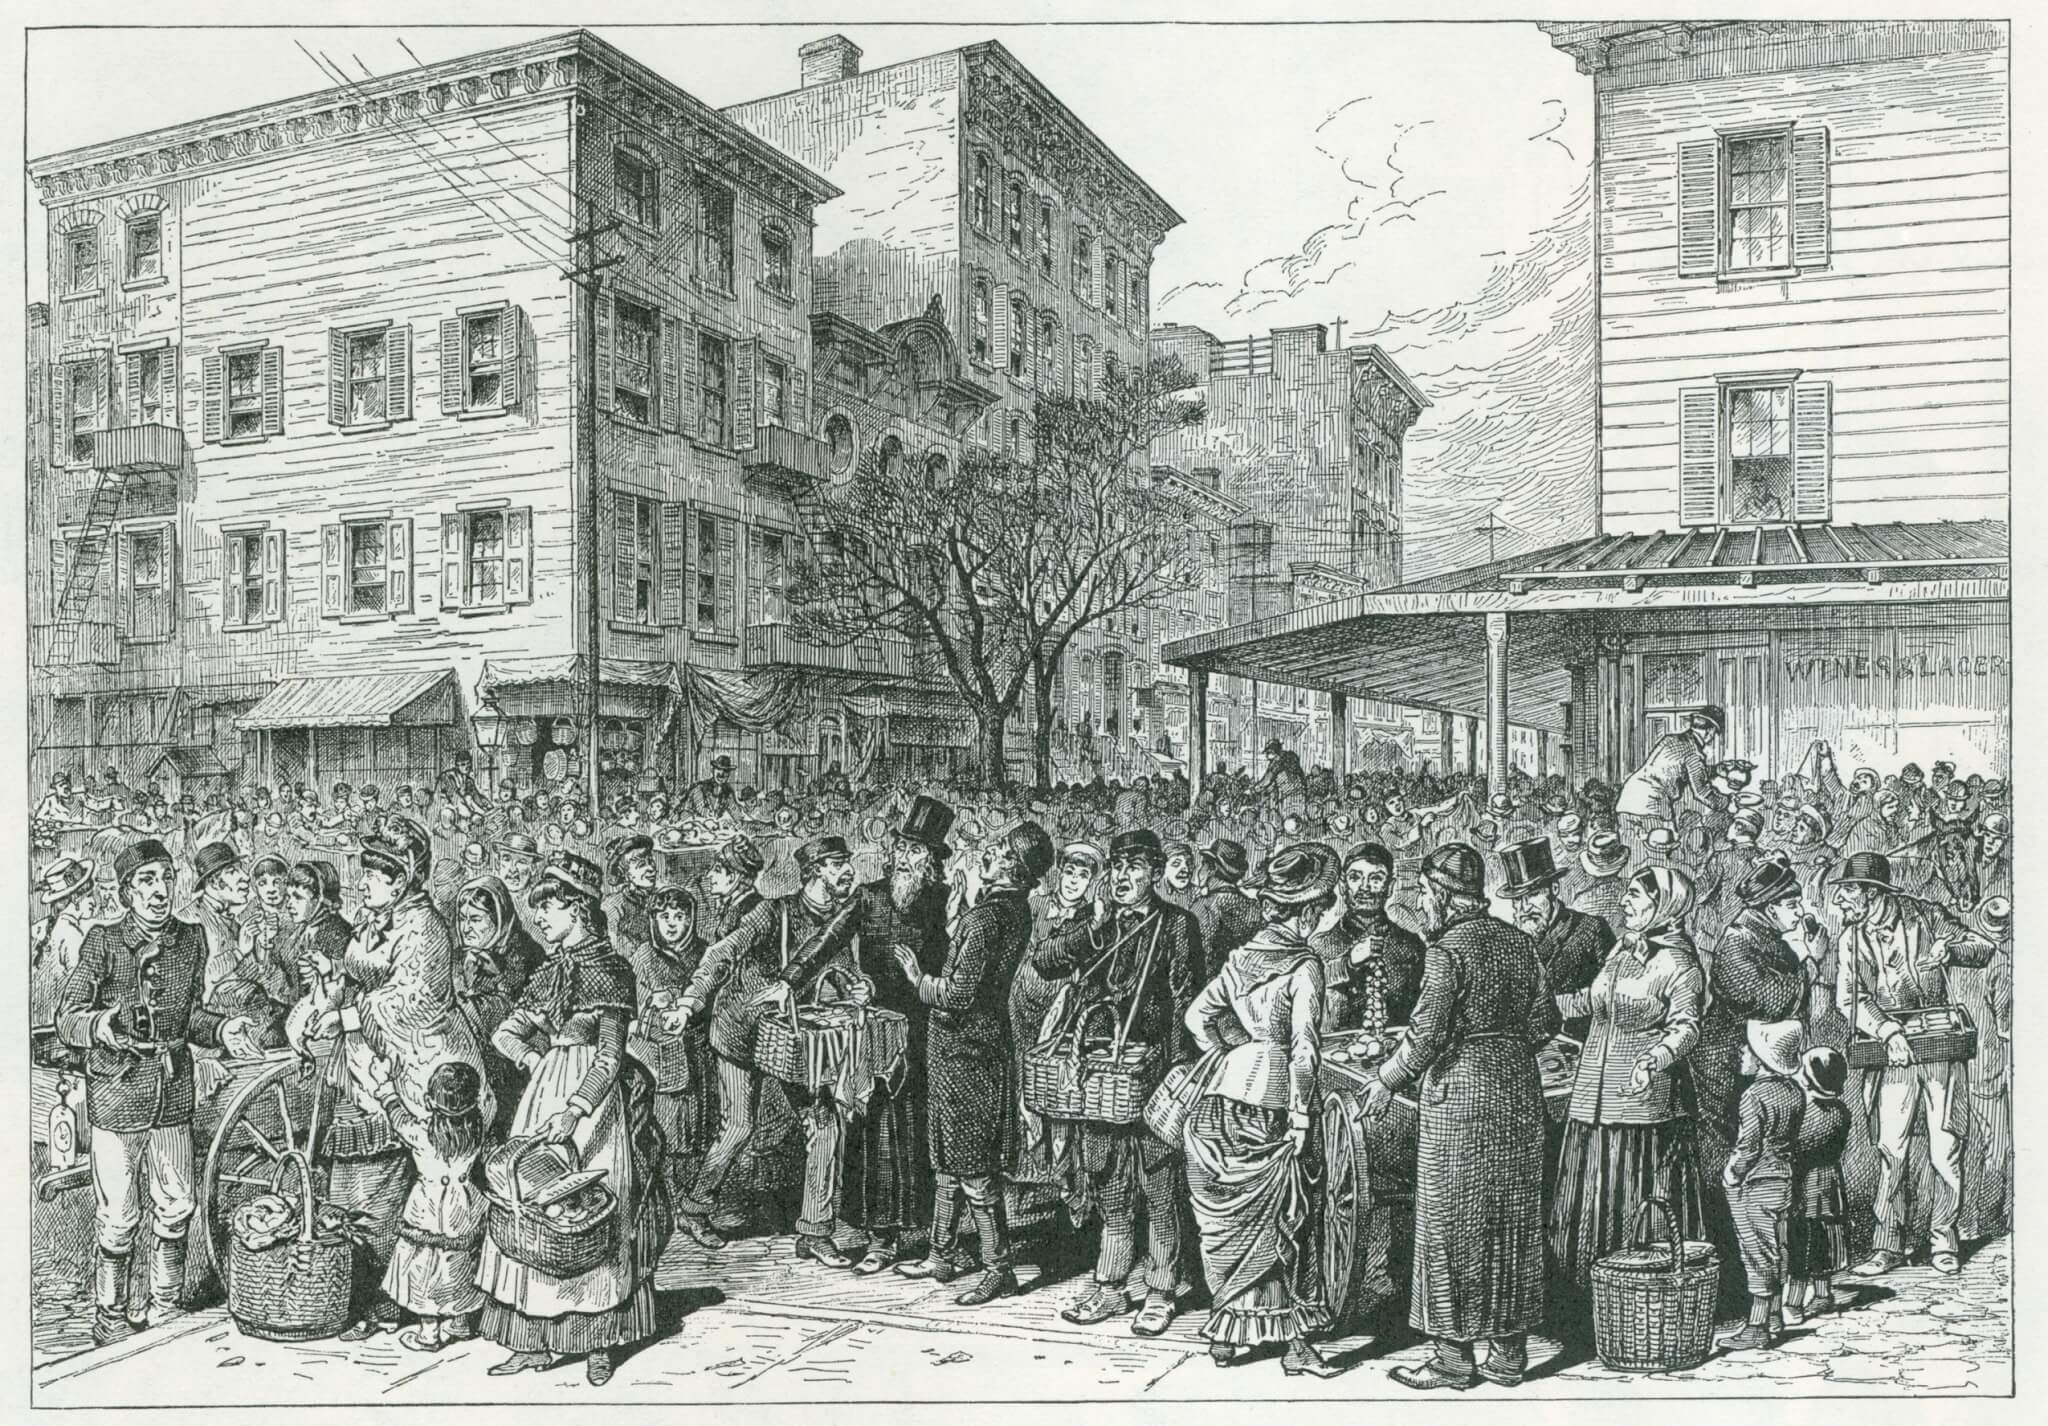 Hester Street Market, New York City's Lower East Side in 1884. The neighborhood was becoming home of Polish and Eastern European Jews emigrating from Russian Empire because of Anti-Jewish pogroms.